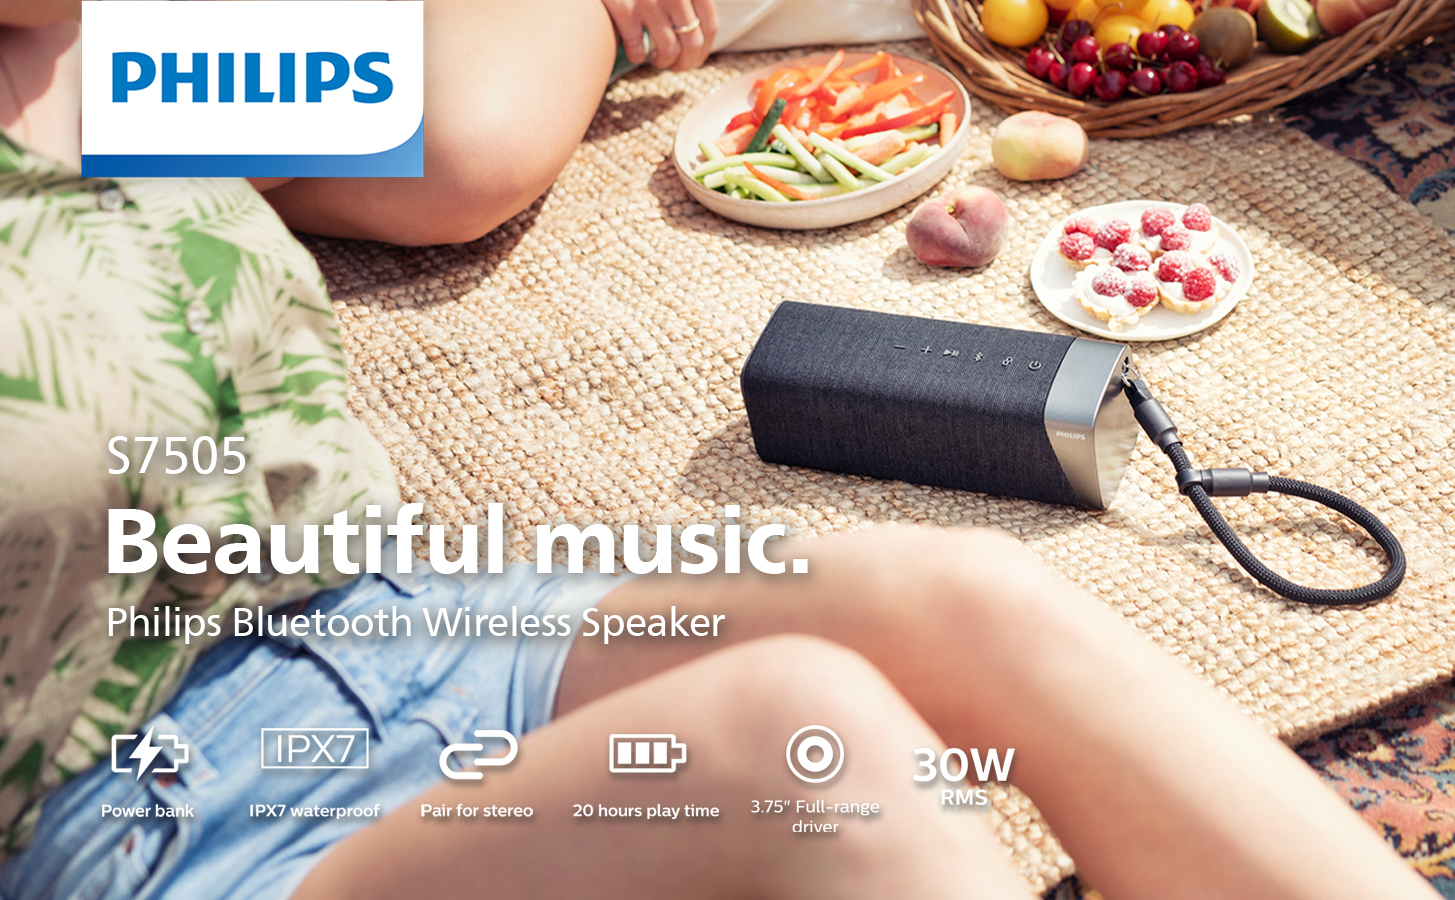 Philips S7505 Wireless Bluetooth Speaker Size, TAS7505 Large Gray, Built-in Power-Bank, with